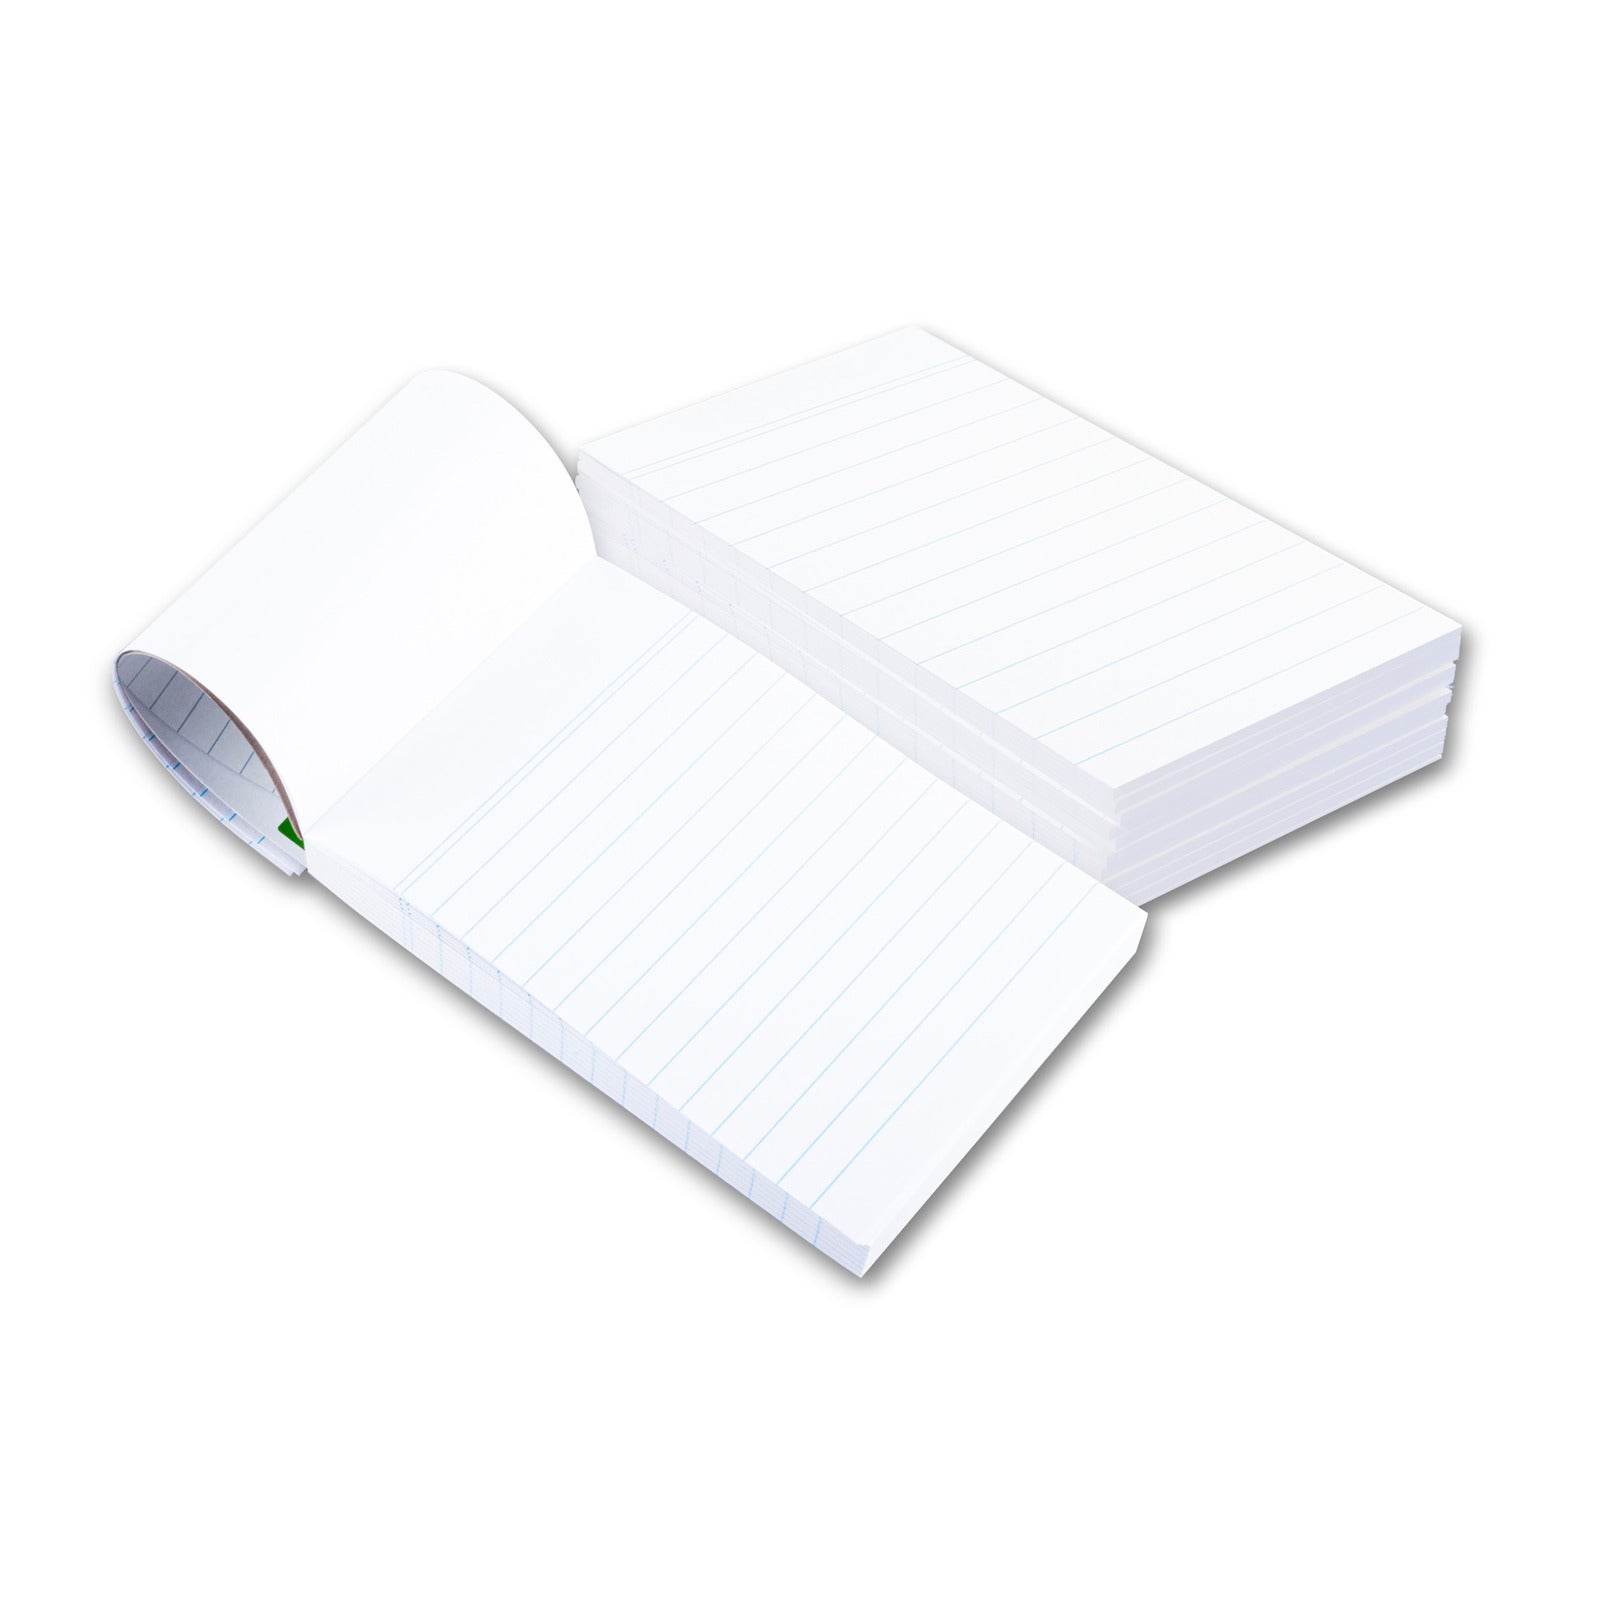 Office Central 24PK Note Pads Lined Crisp White Office School Home Business 147 x 98mm